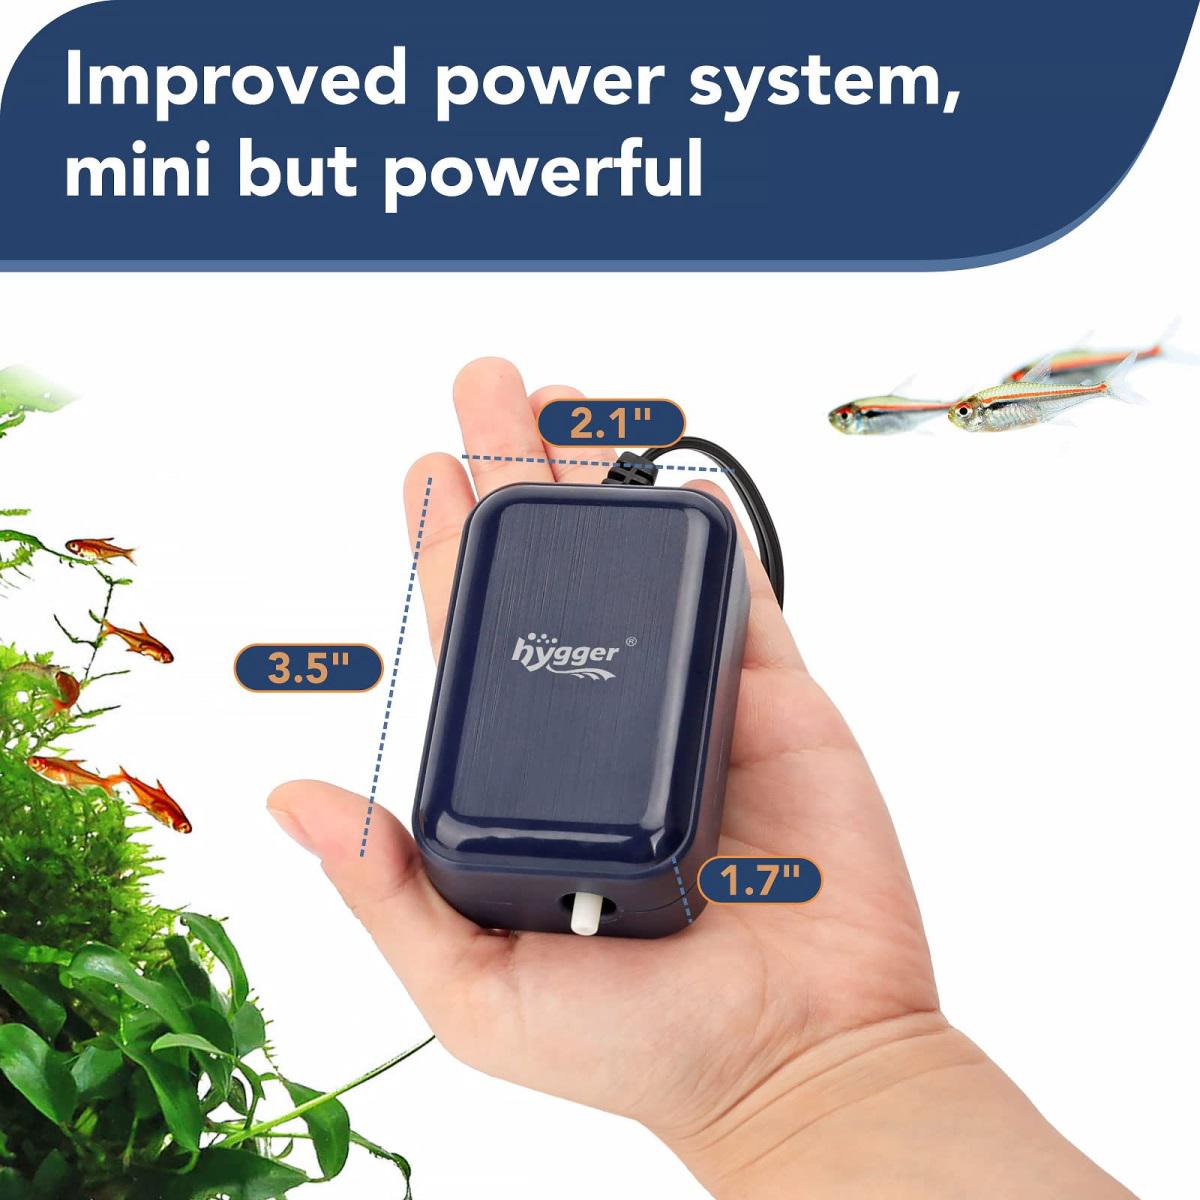 Mini and powerful oxygen pump